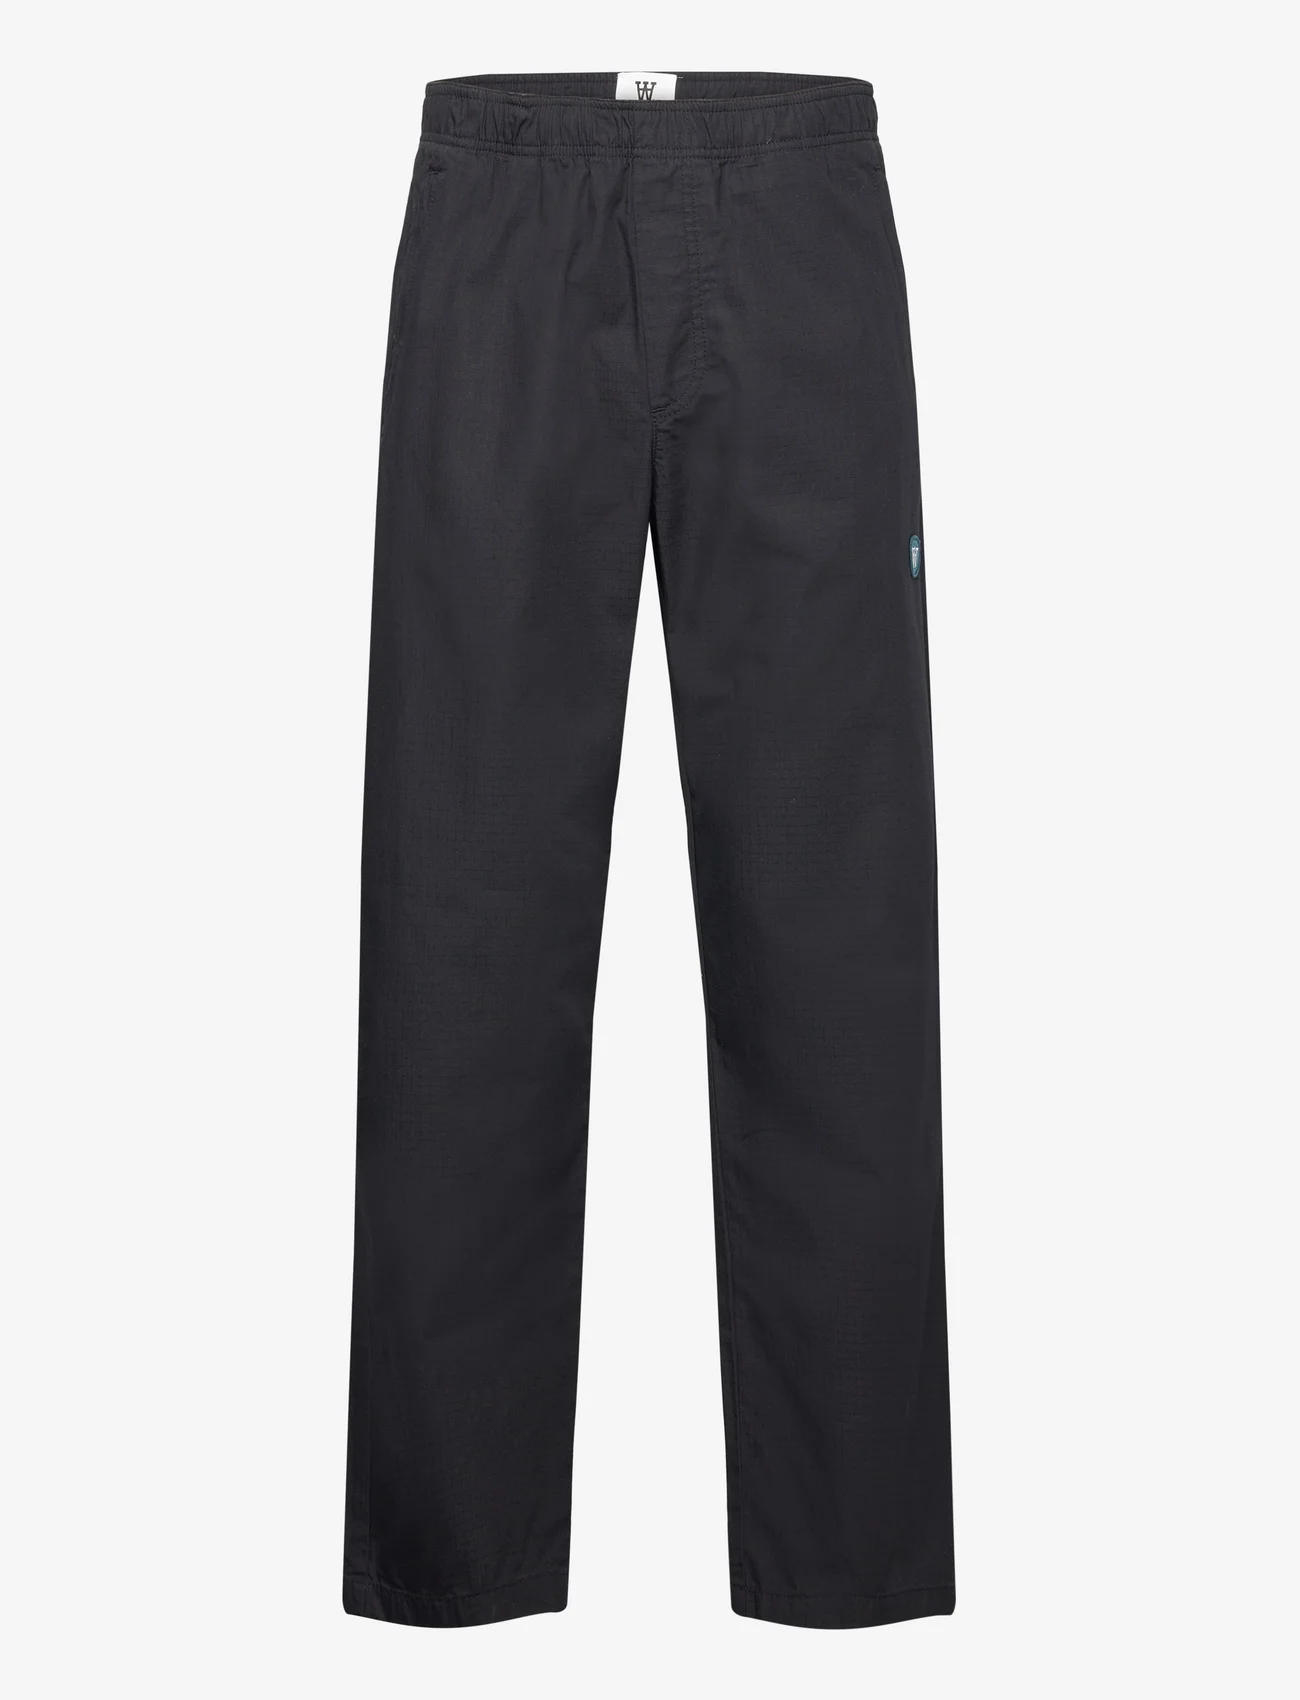 Double A by Wood Wood - Lee ripstop trousers - casual - black - 0